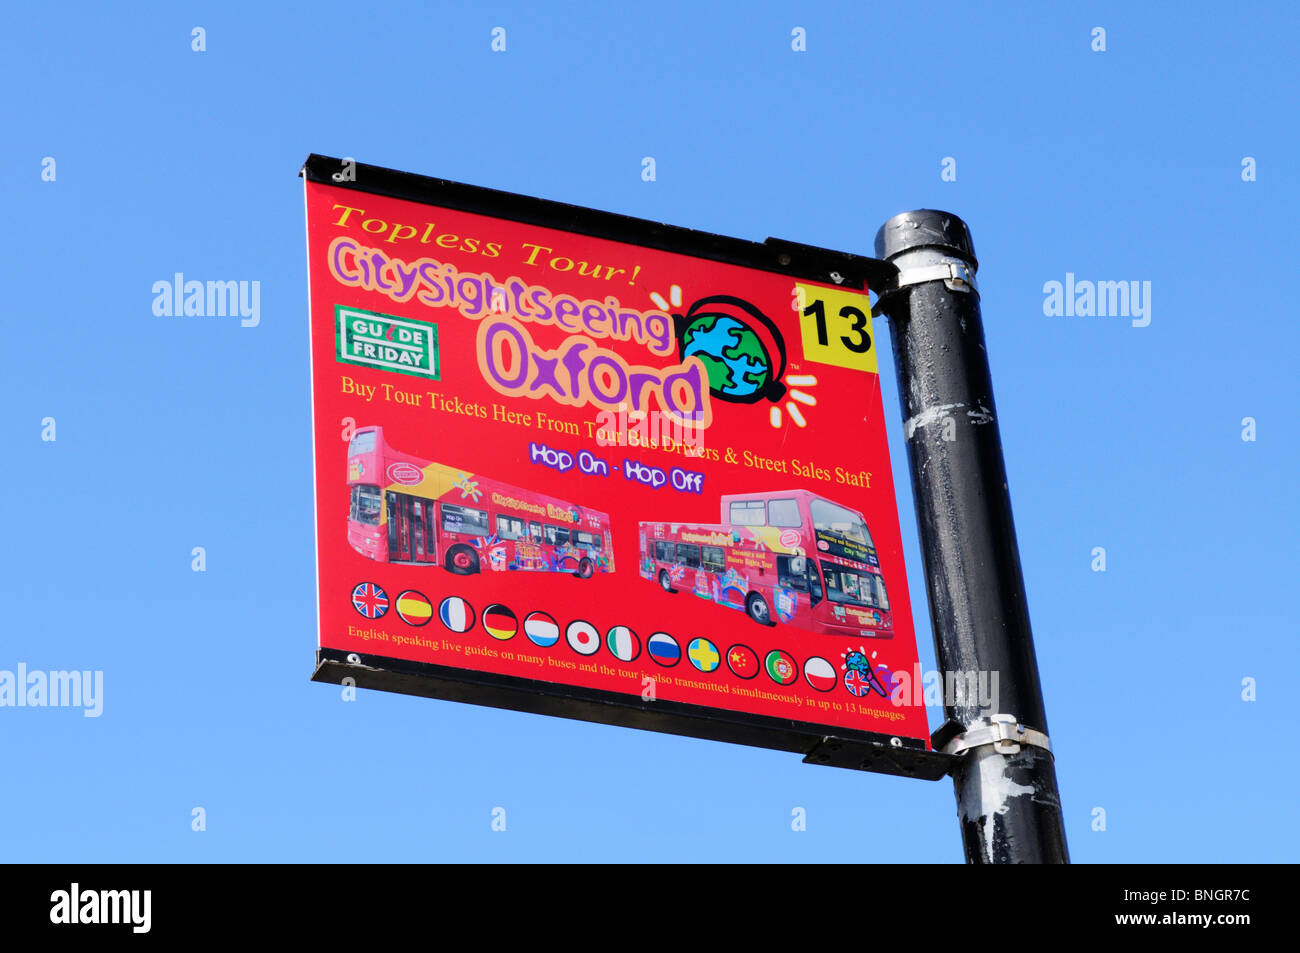 Oxford City Sightseeing Bus Stop sign against a blue sky, Oxford England UK Banque D'Images